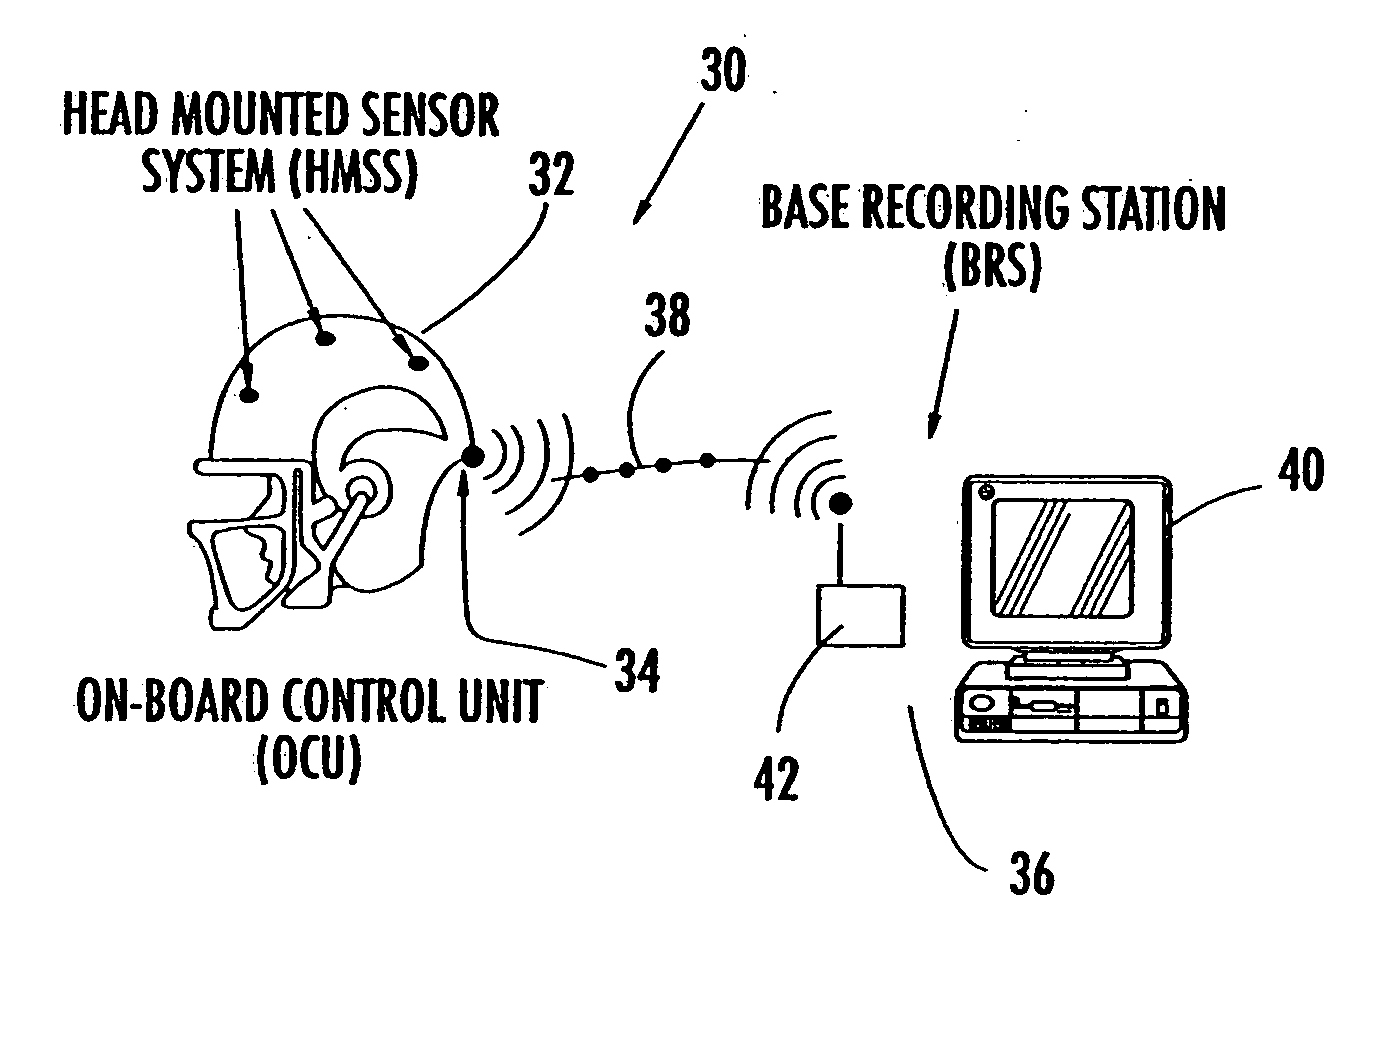 Power management of a system for measuring the acceleration of a body part